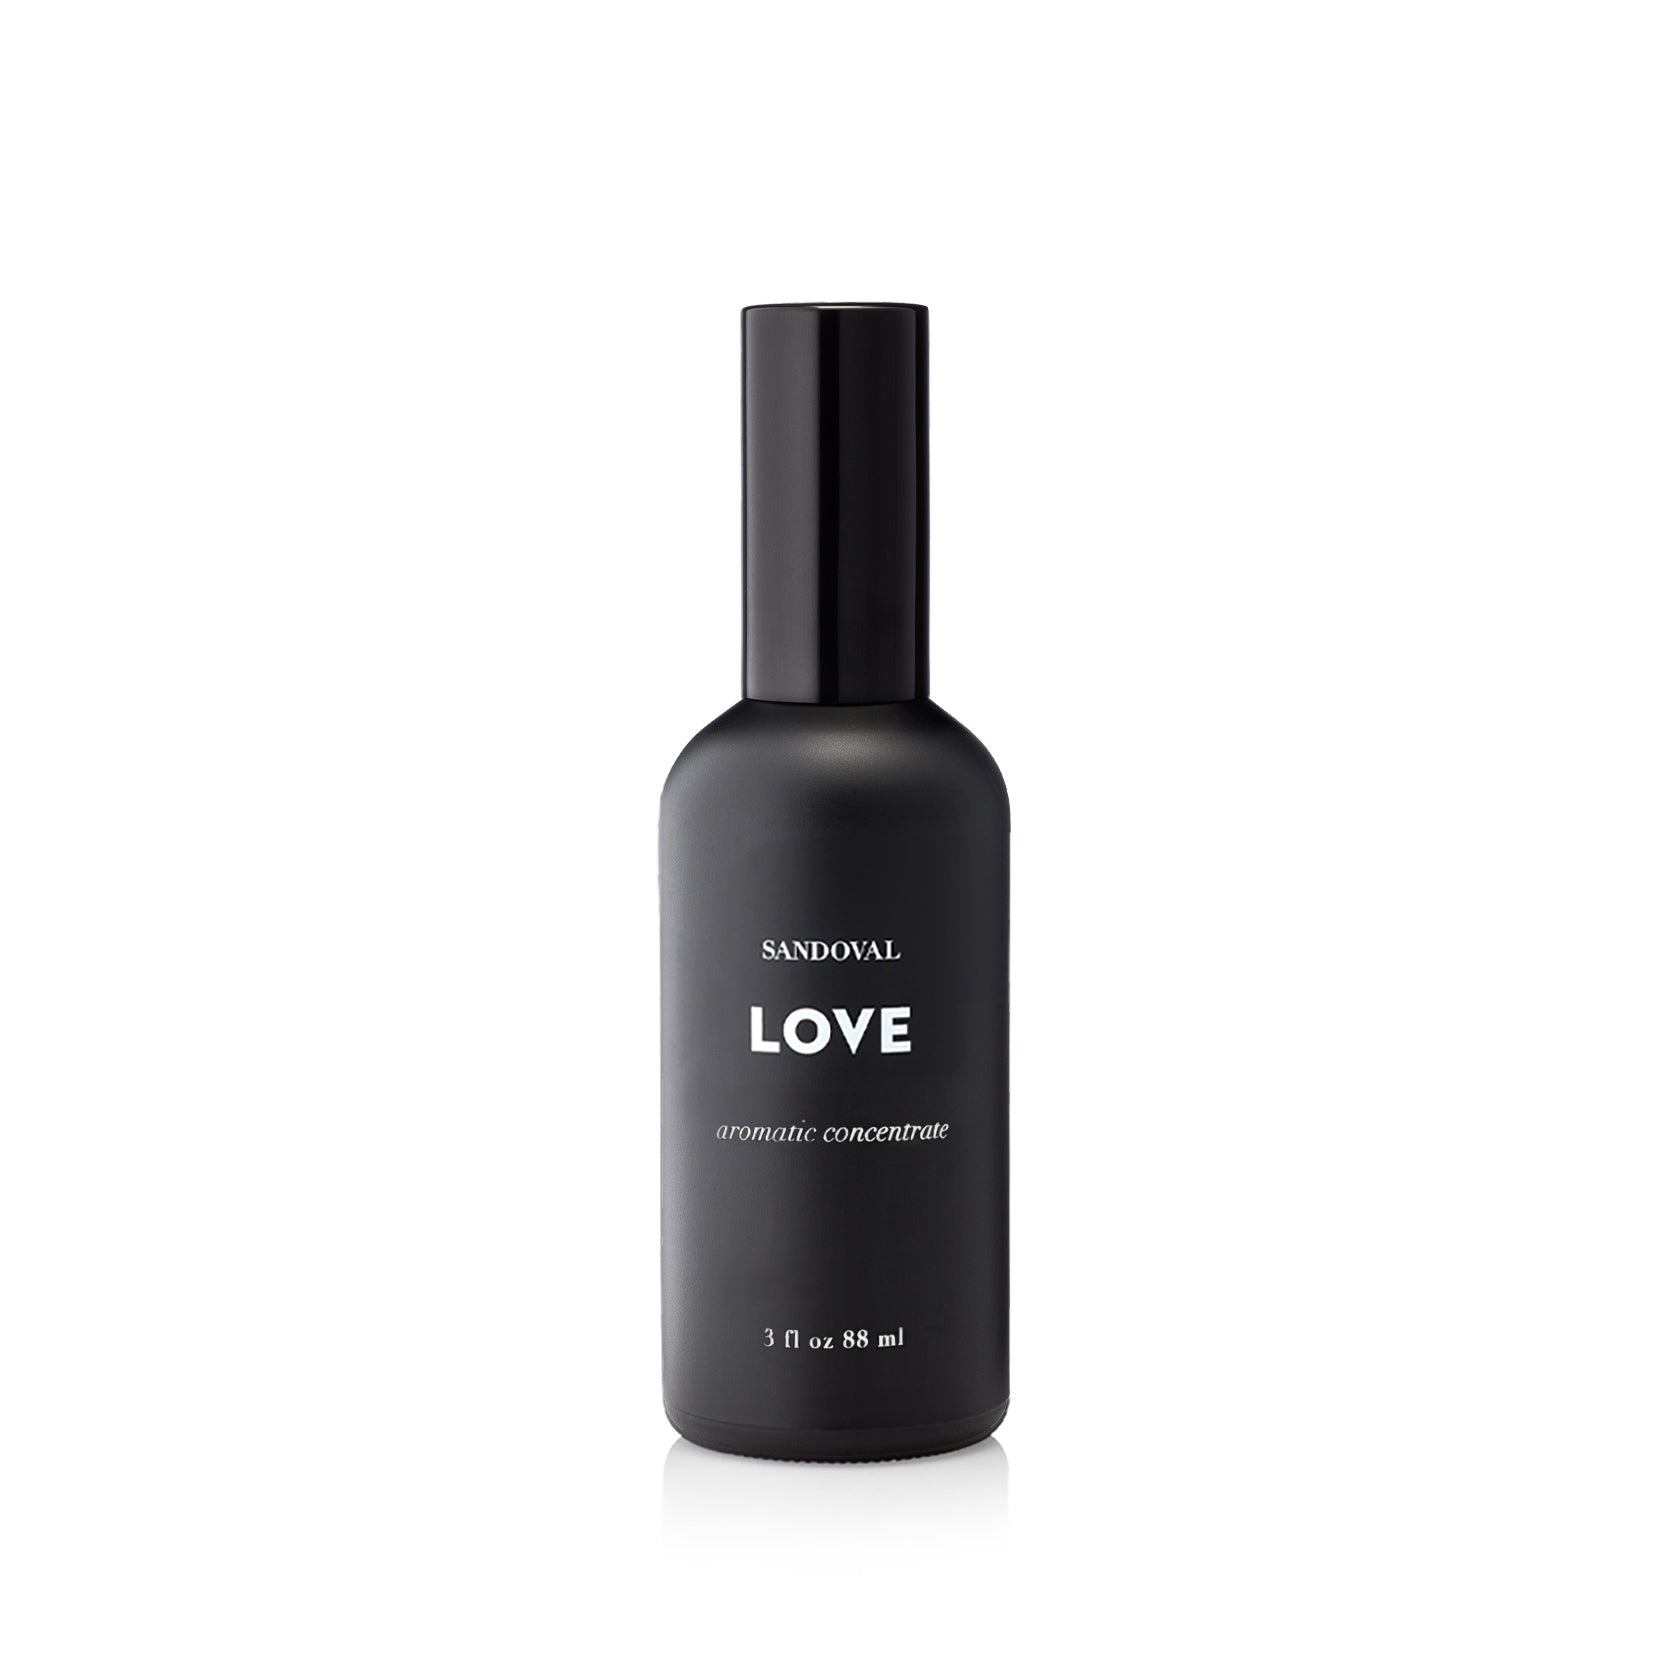 love aromatic concentrate aromatherapy spray,linen spray,air freshener.ylang ylang essential oil,jasmine essential oil,neroli essential oil.